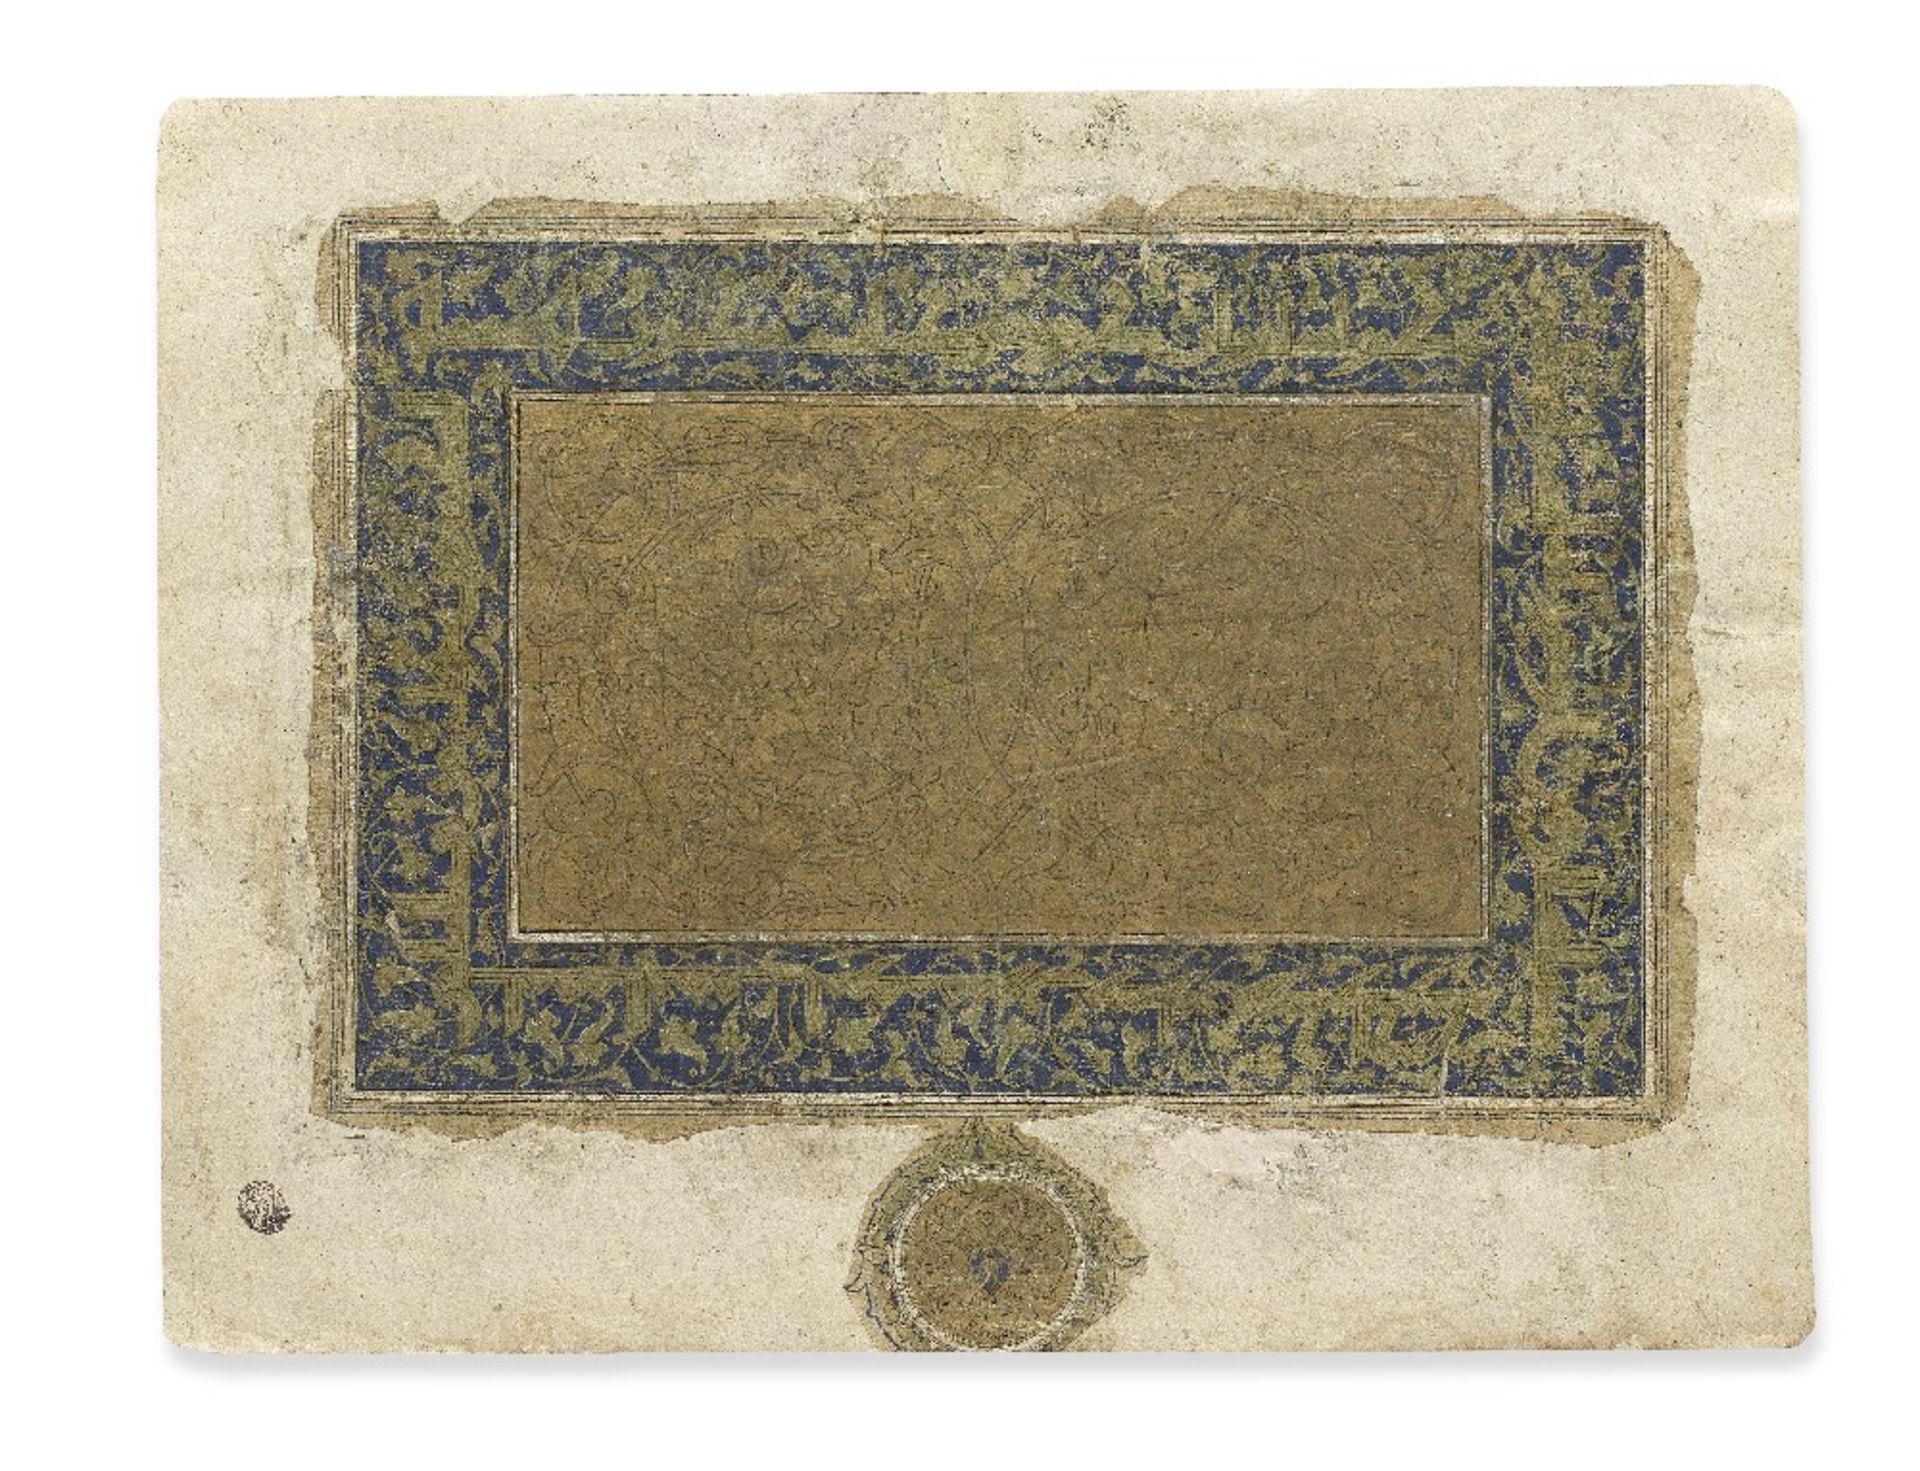 A large and finely illuminated frontispiece from a manuscript of the Qur'an Mamluk Egypt or Syri...